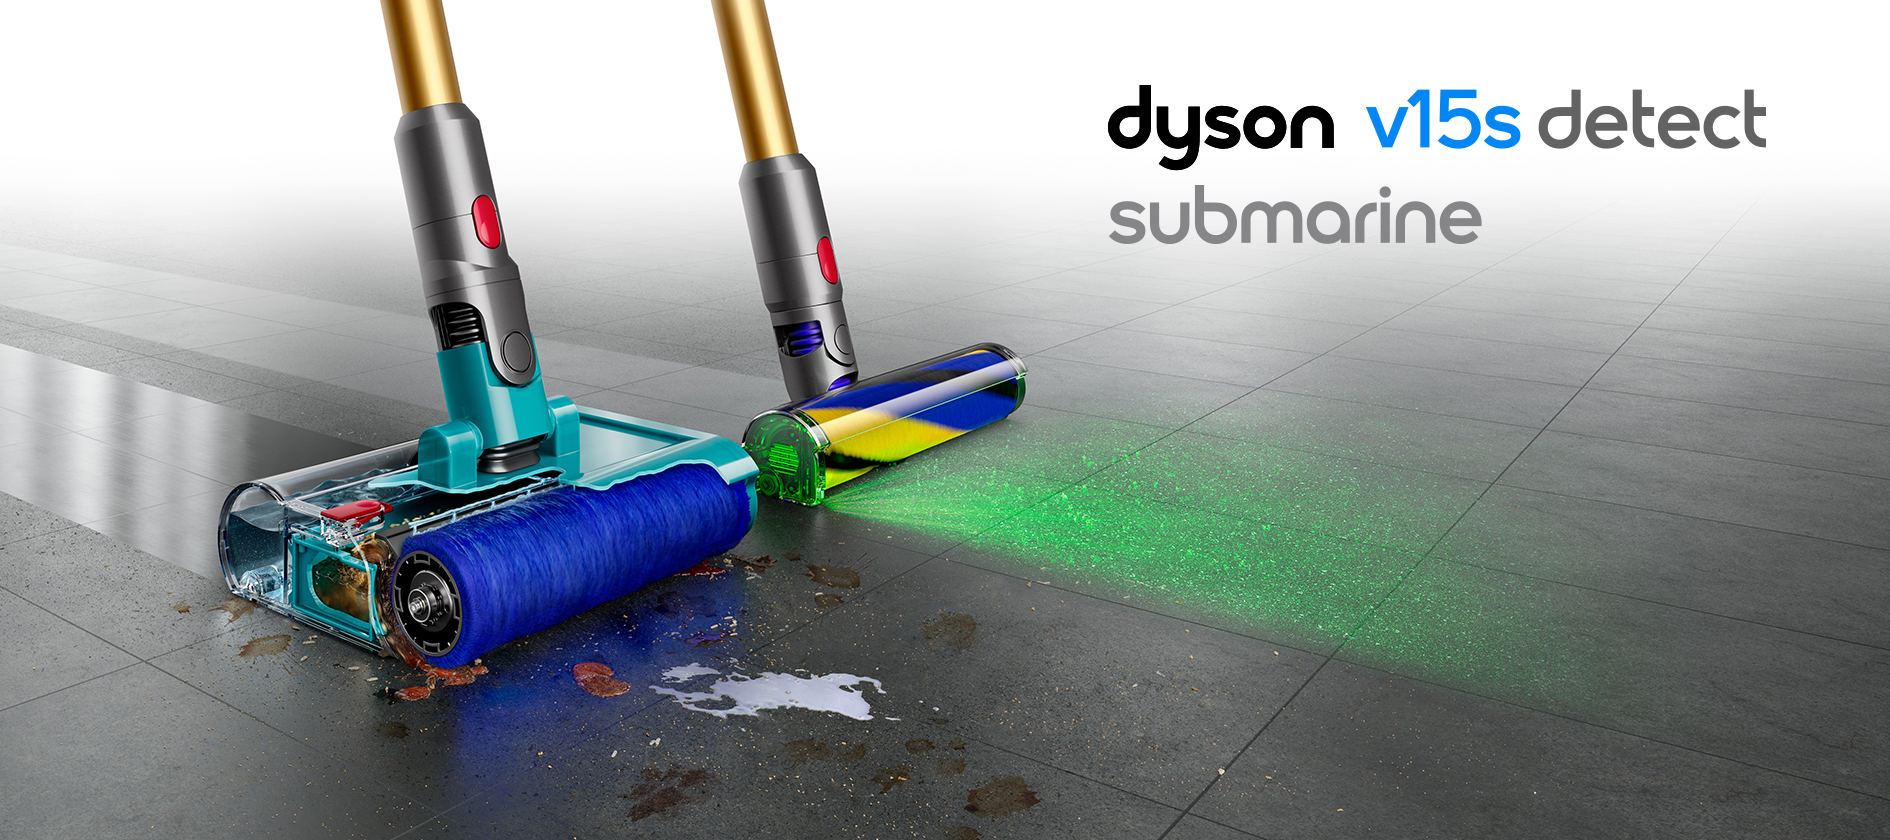 Dyson V15s Detect Submarine™ - Now available in Australia and New Zealand